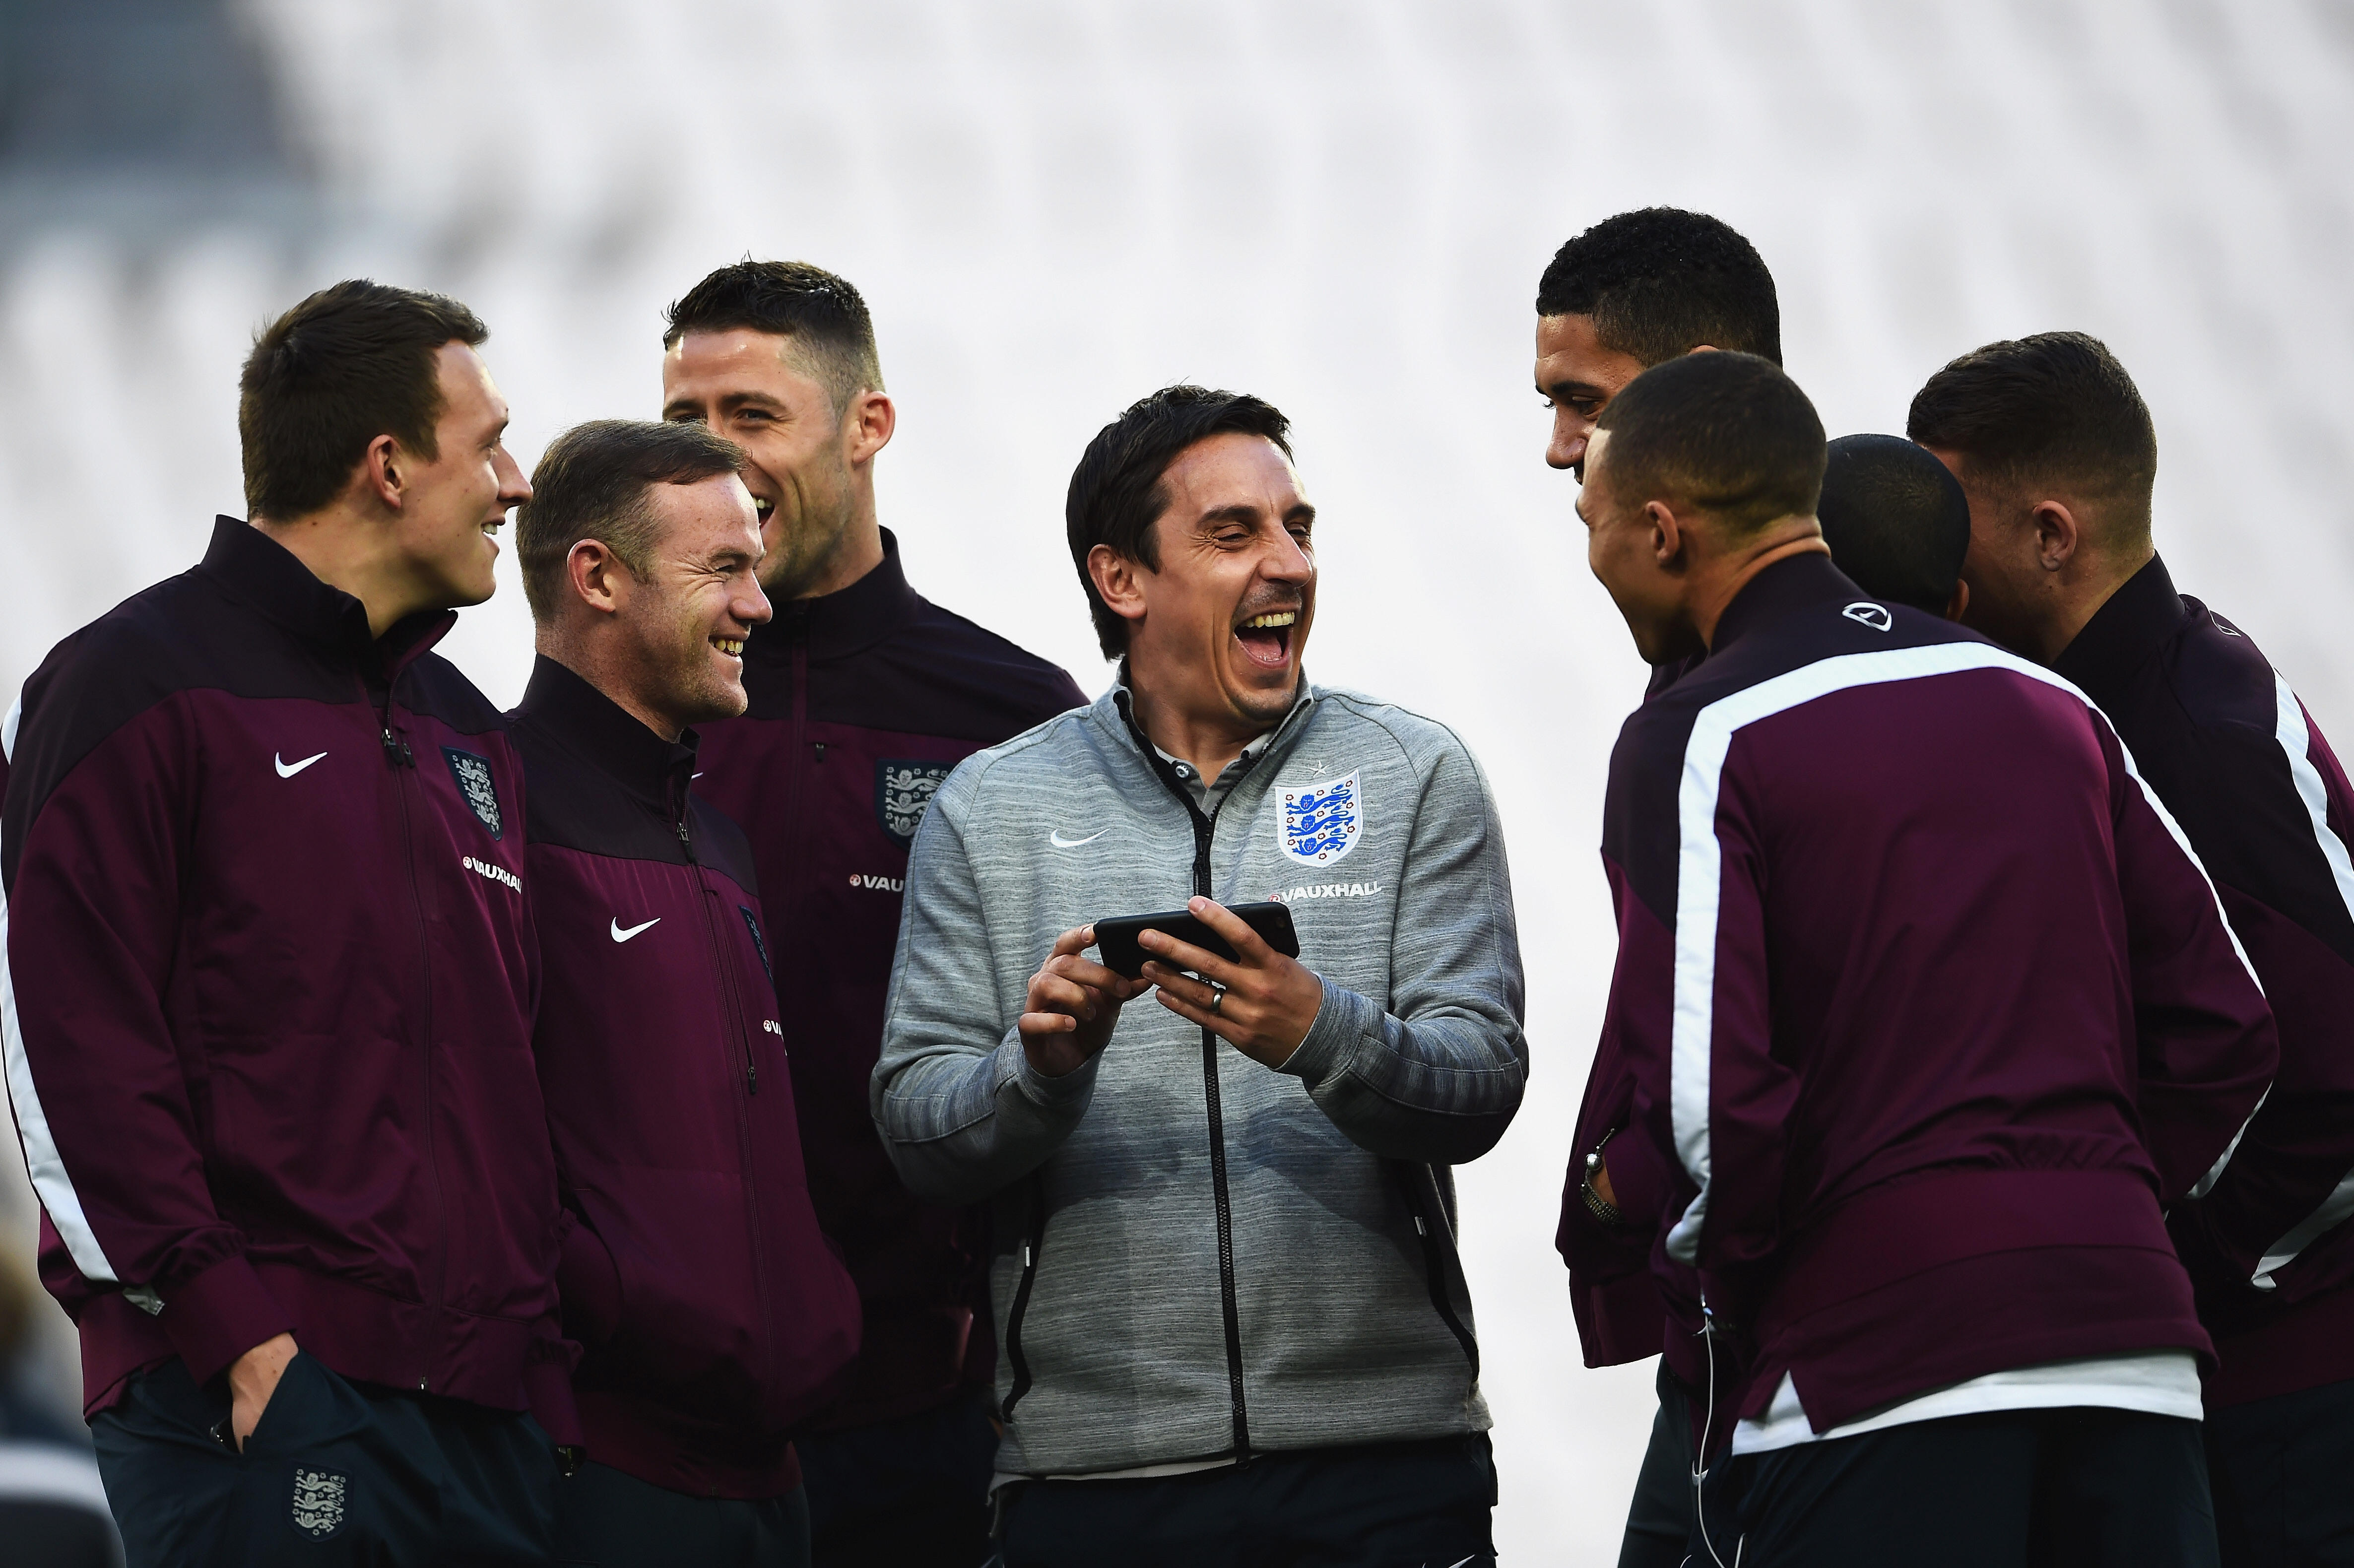 TURIN, ITALY - MARCH 30: First Team Coach Gary Neville of England laughs with England players including Phil Jones (L) and Wayne Rooney (2ndL) during an England team stadium visit ahead of the International Friendly match against Italy at Juventus Arena o